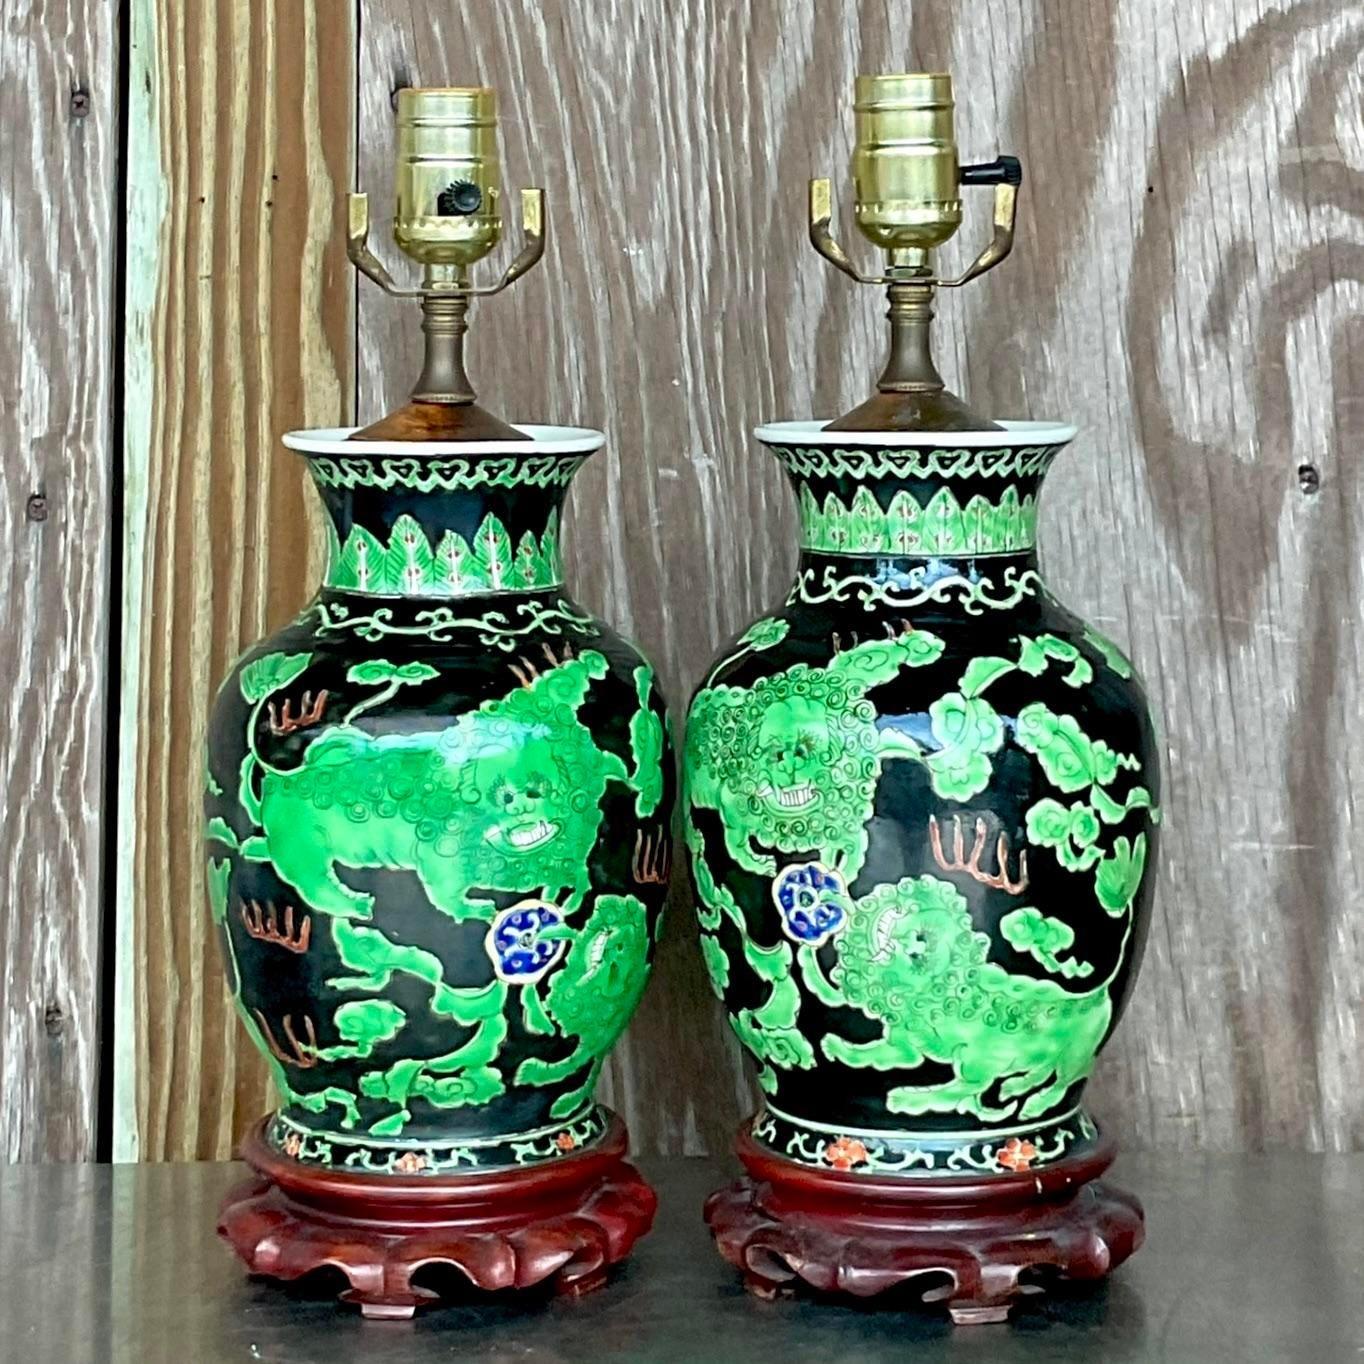 Chinese Vintage Asian Ginger Jar Dragon Lamps - a Pair For Sale